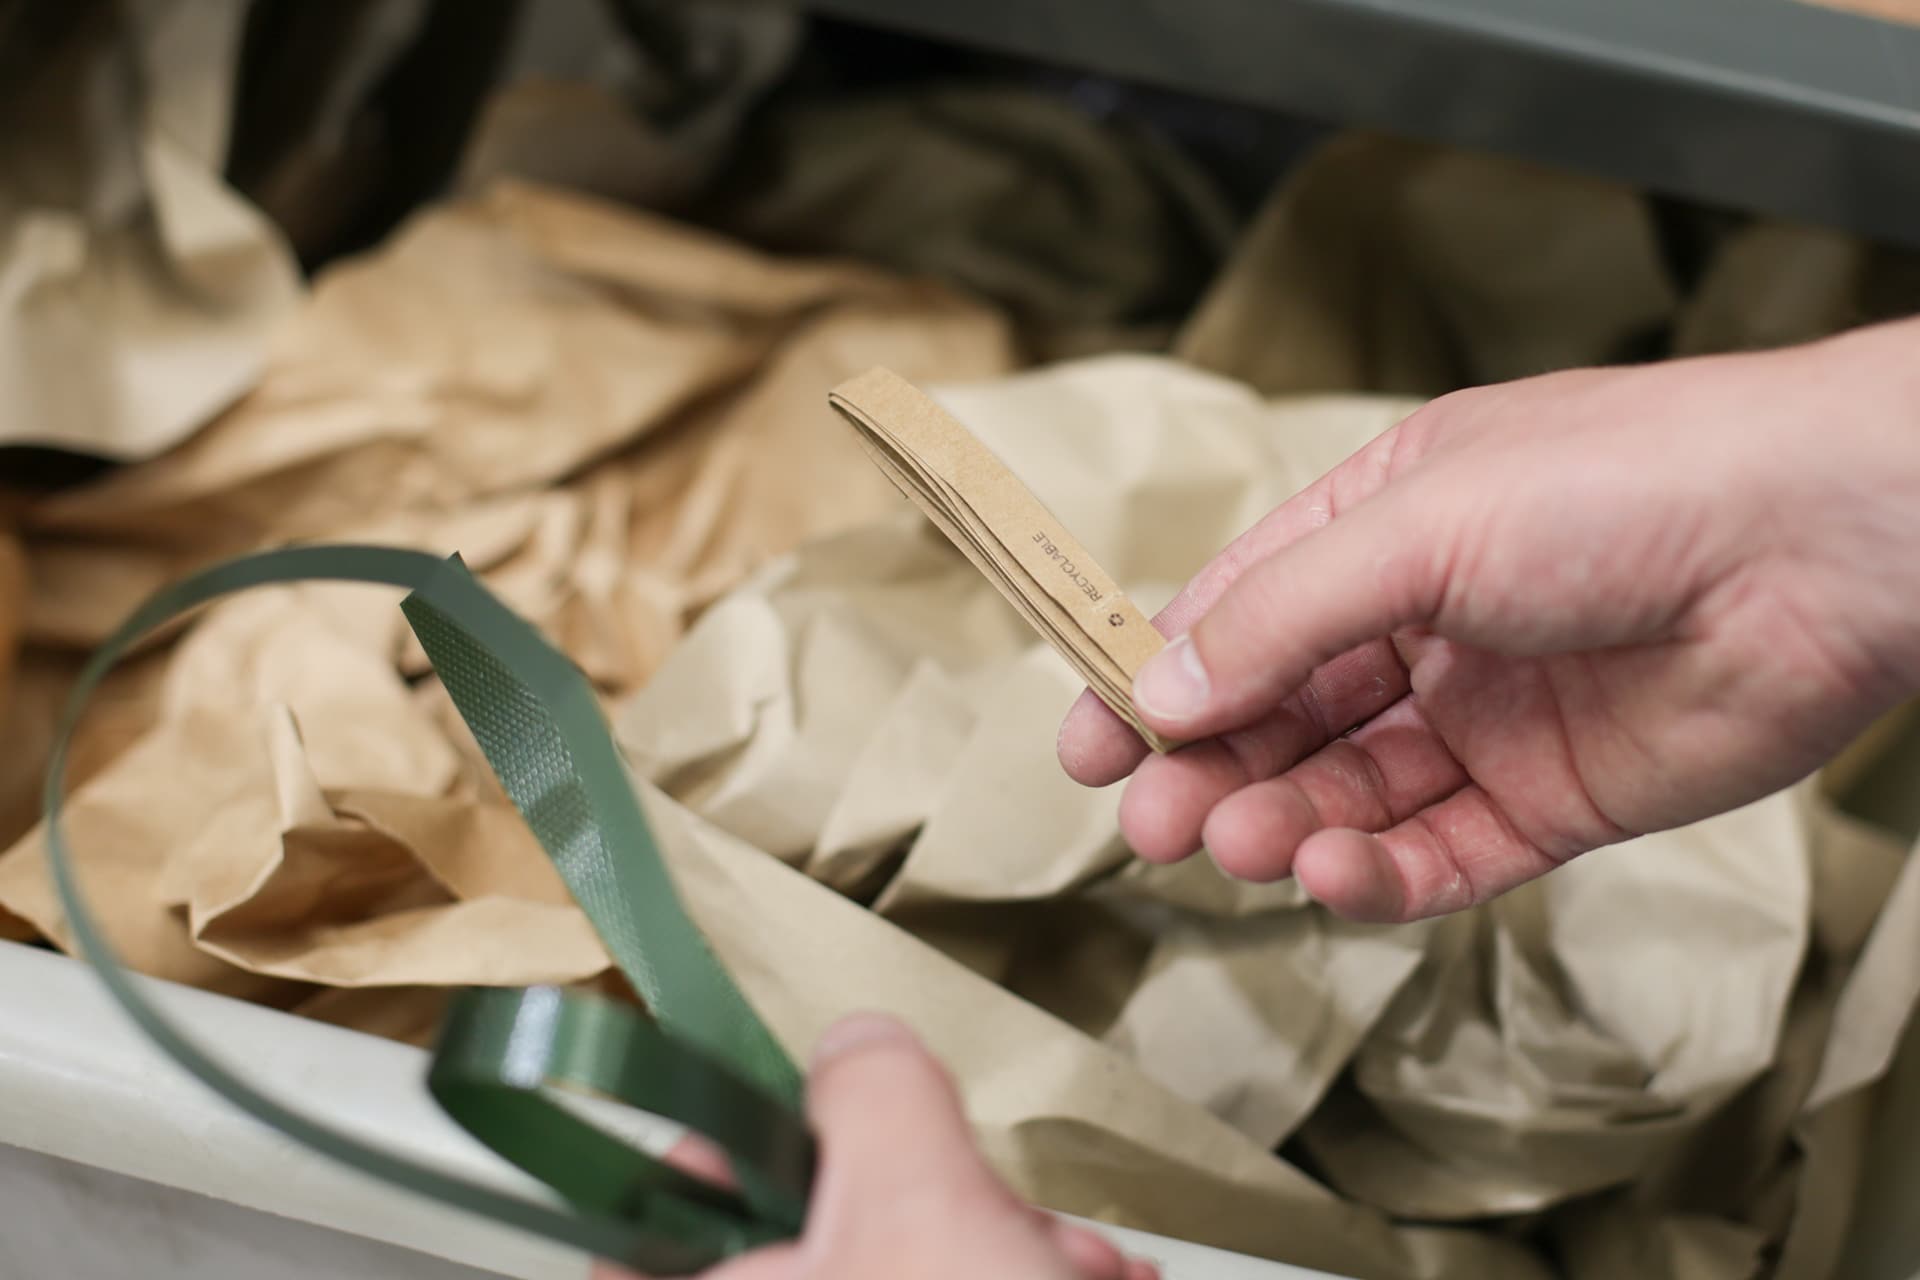 Paper Strapping is easy to dispose of with other paper and cardboard